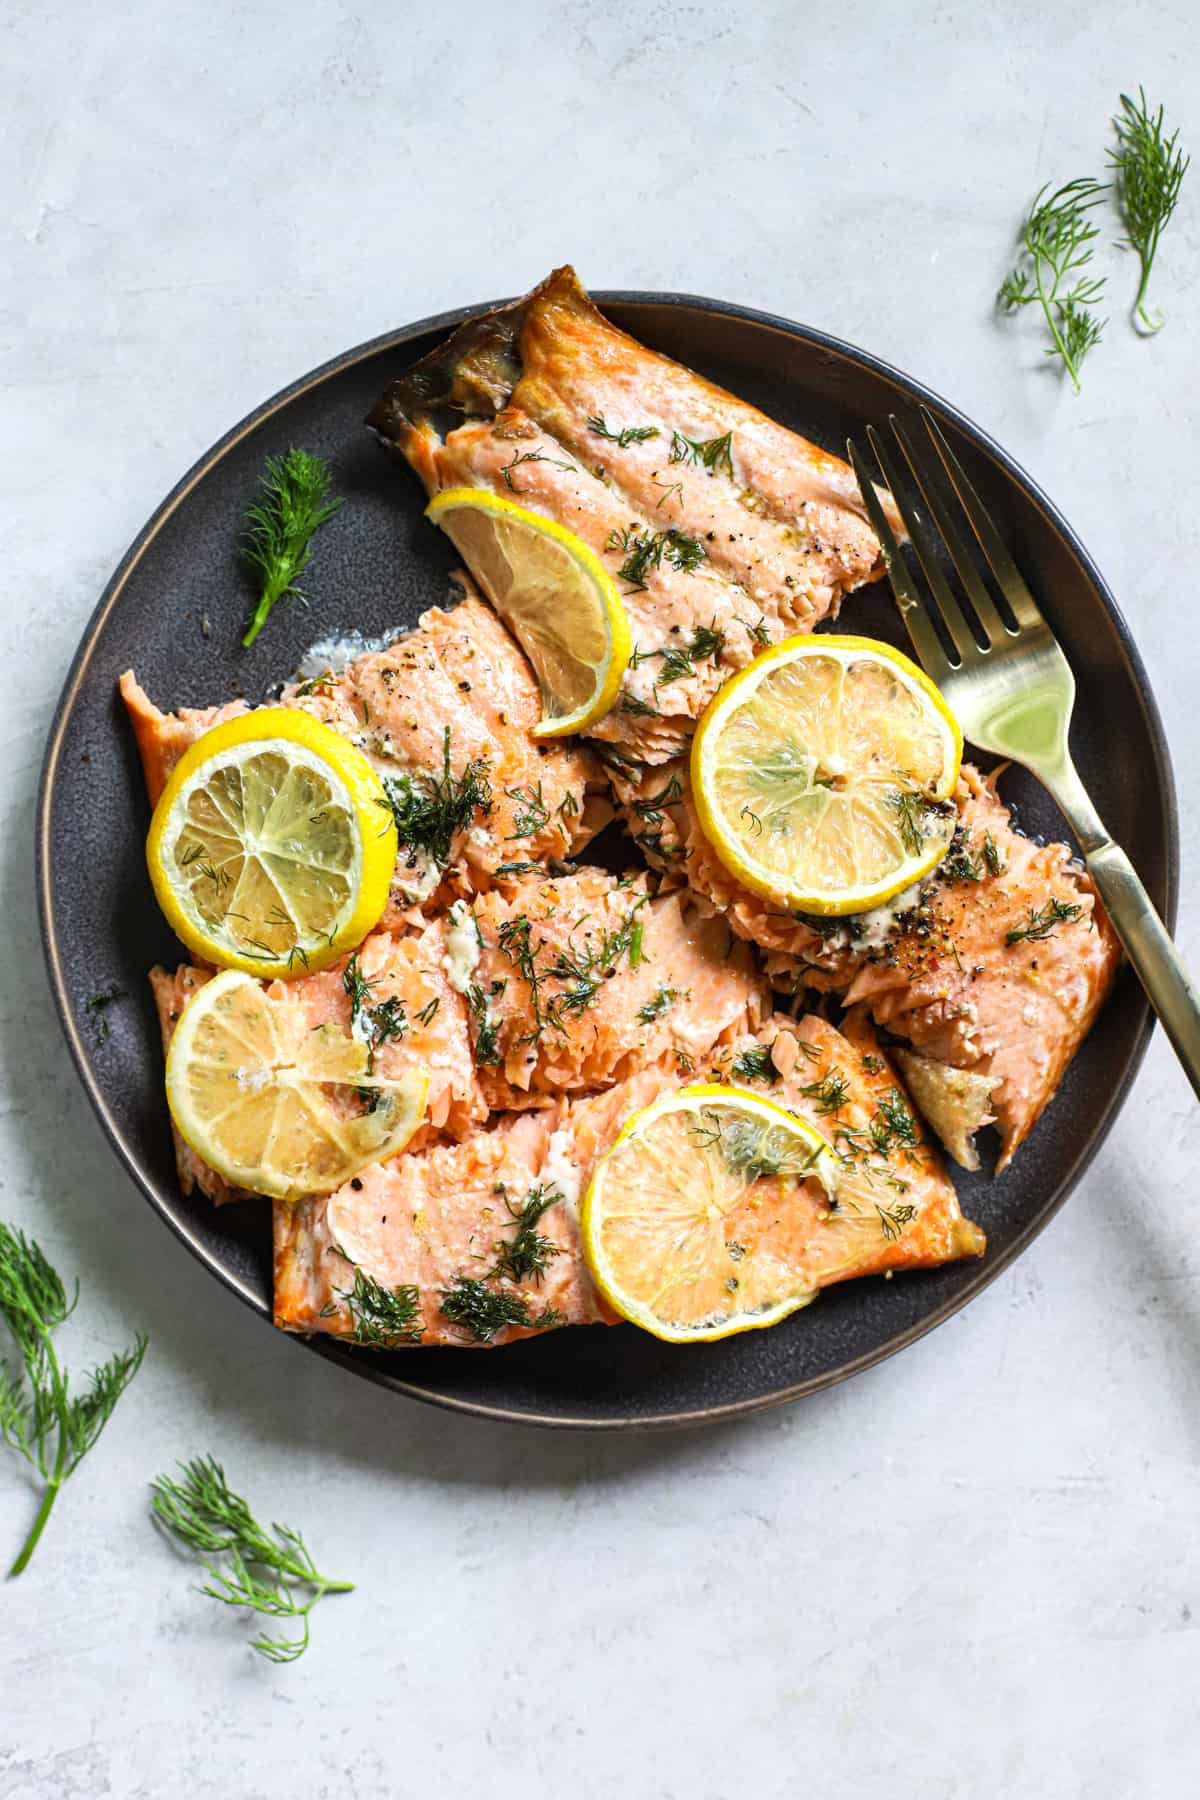 Lemon dill salmon pieces topped with lemon slices, on dark gray plate with fork